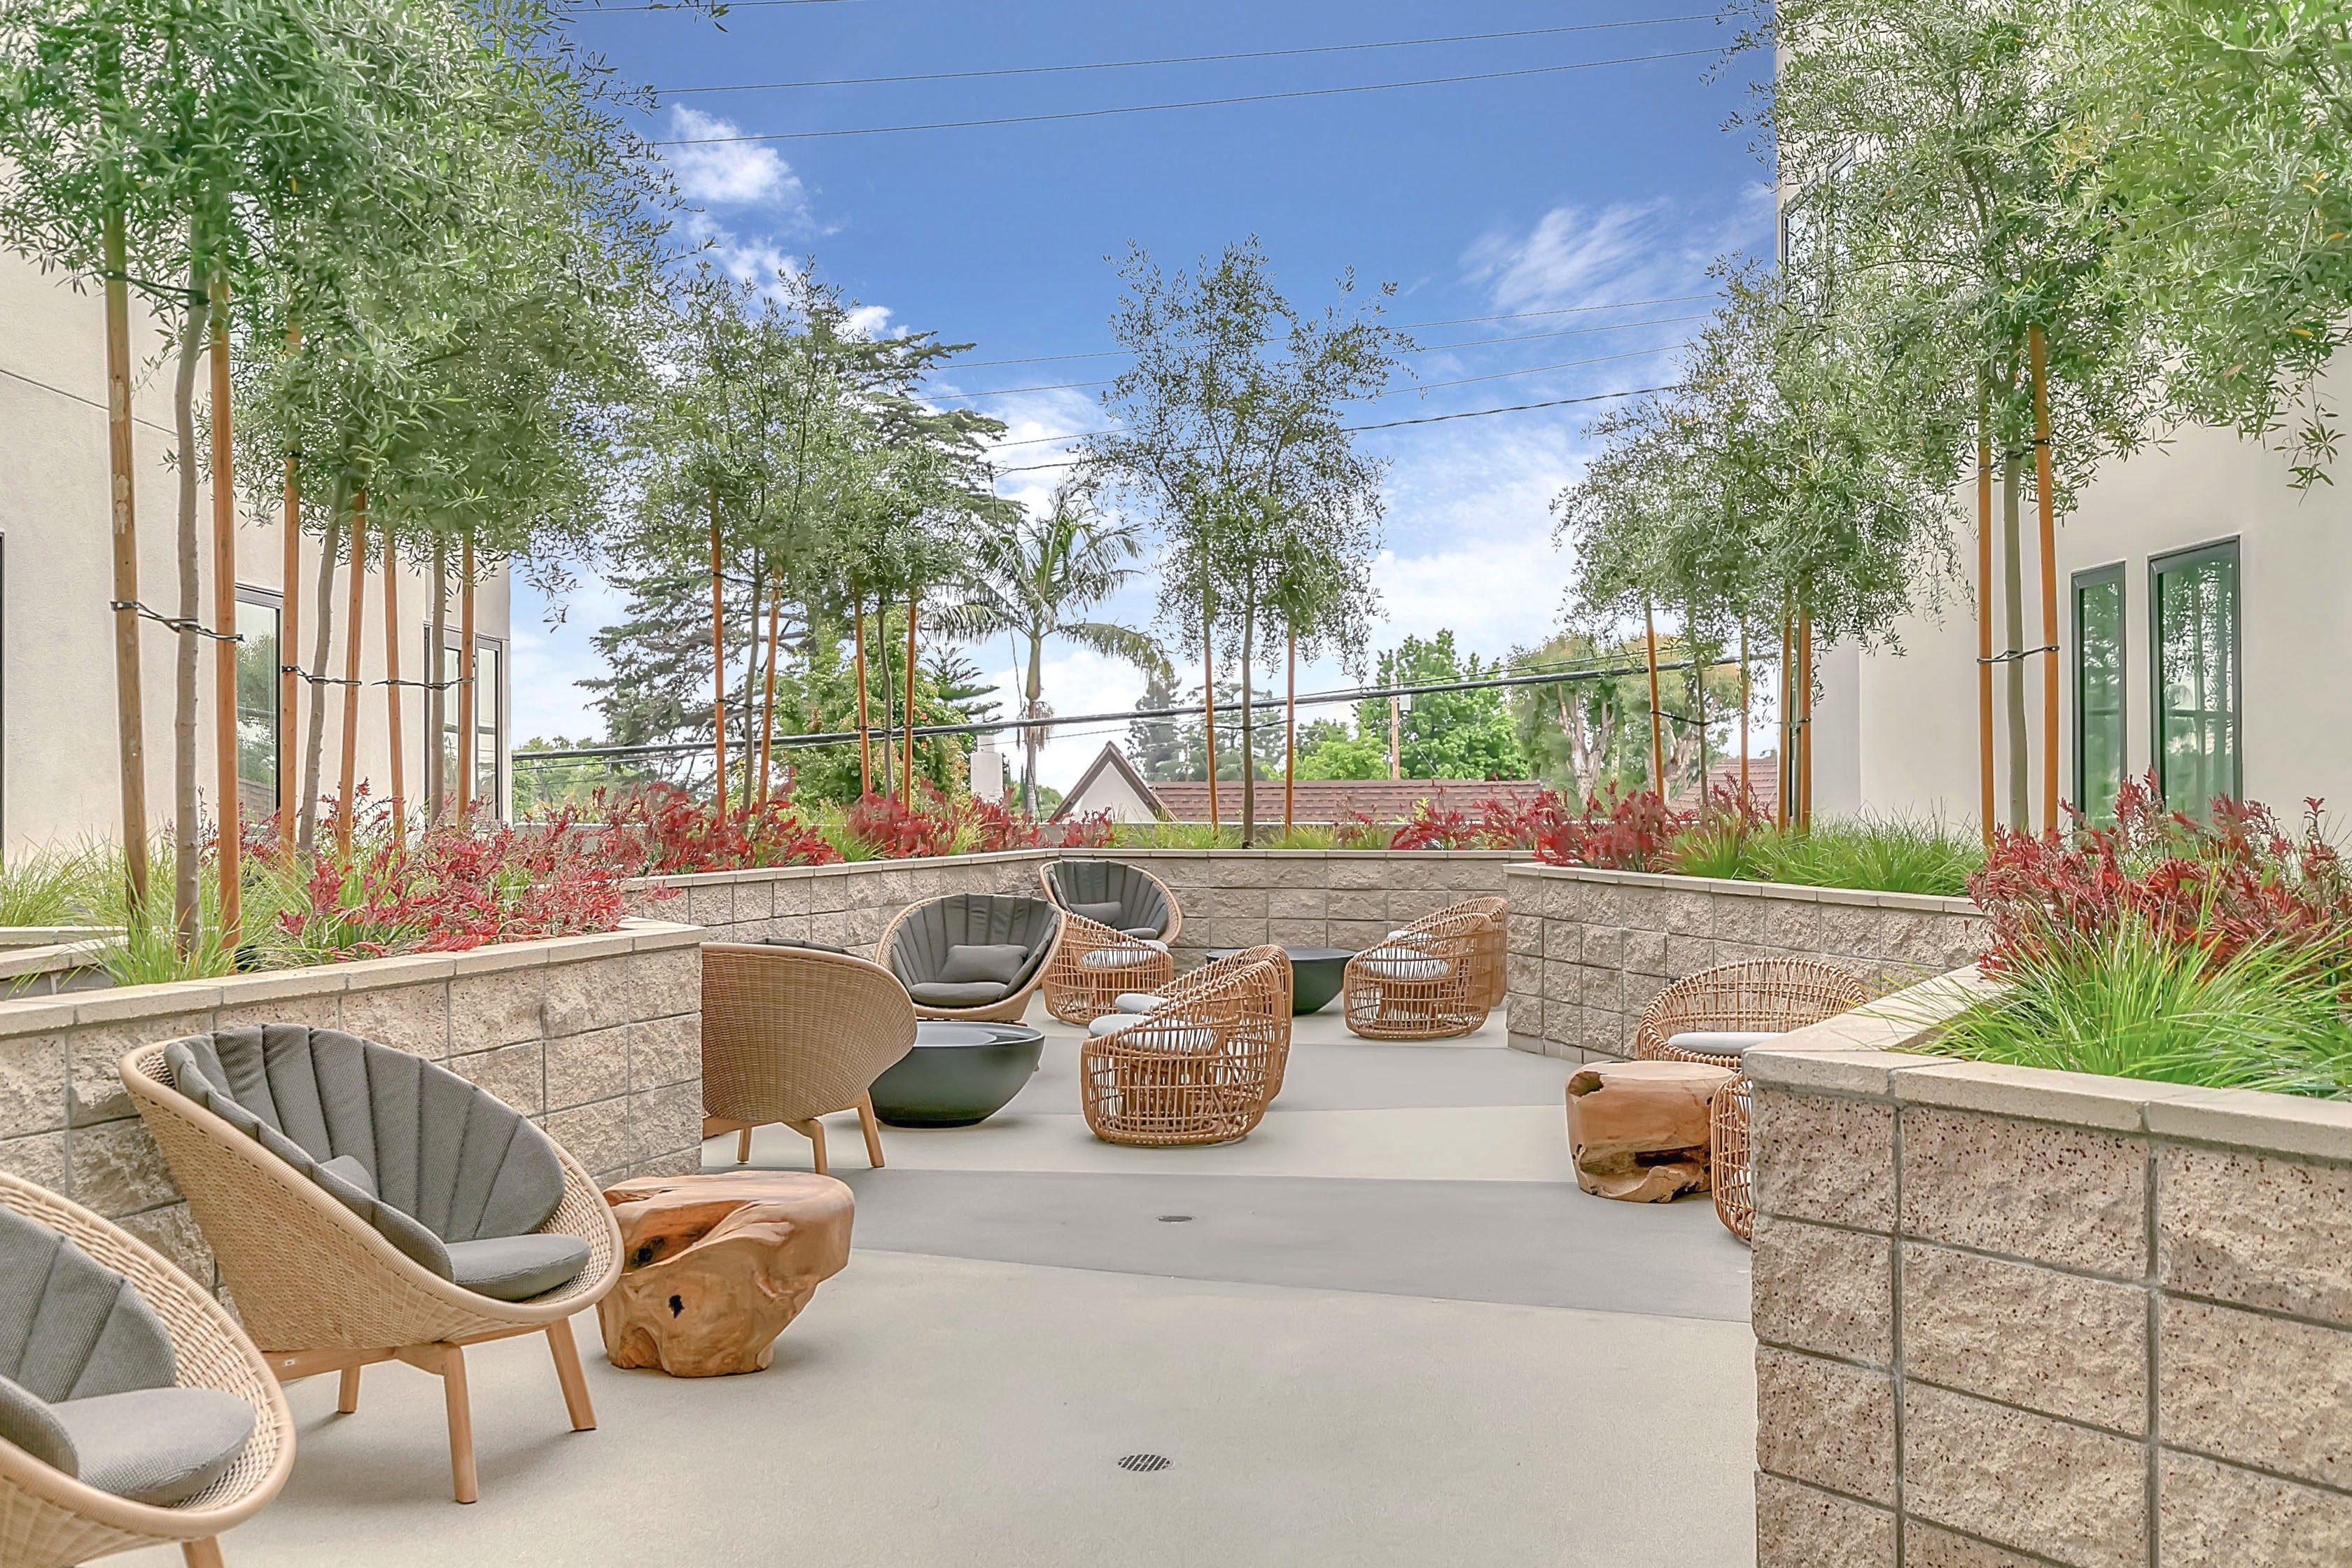 A patio area with wicker furniture and plants at The Rinrose, an apartment community targeting multifamily living.